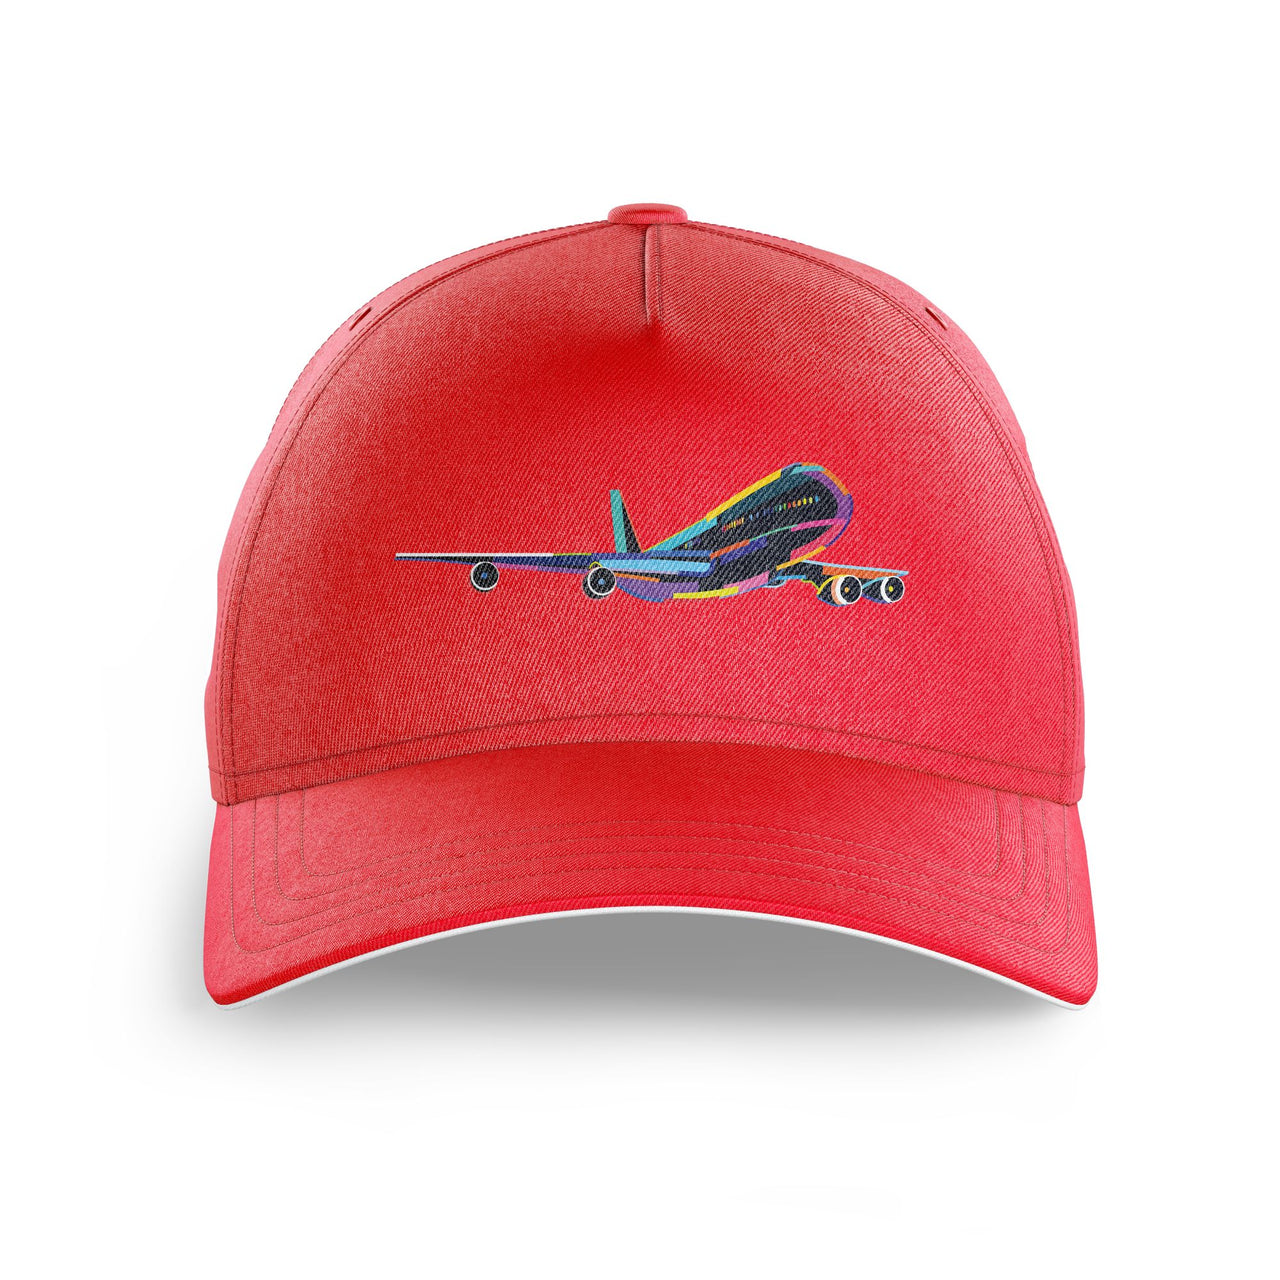 Multicolor Airplane Printed Hats